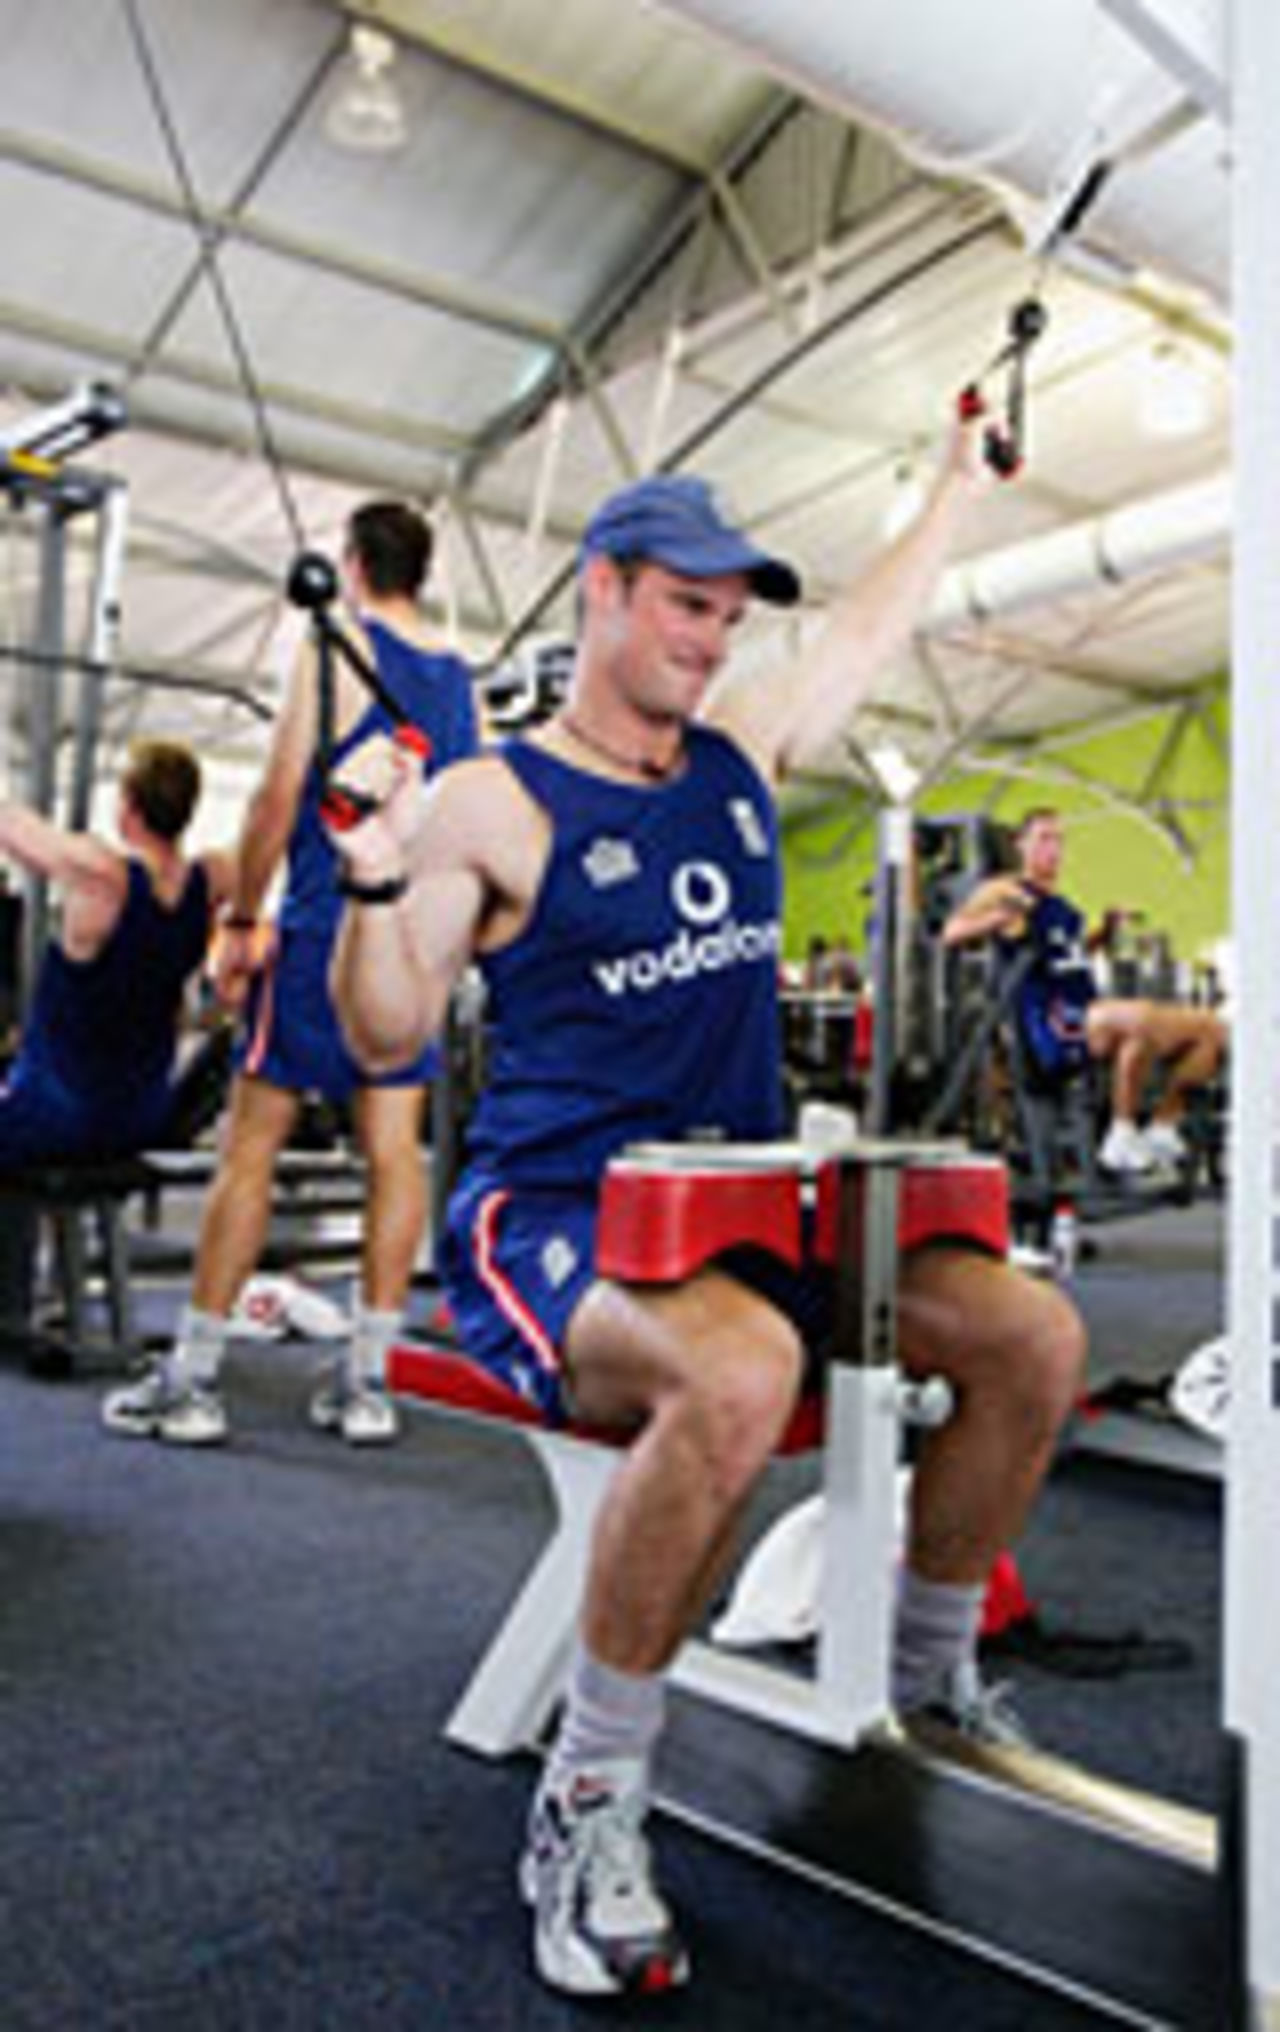 Andrew Strauss doing wights at a Durban gym, December 23 2004